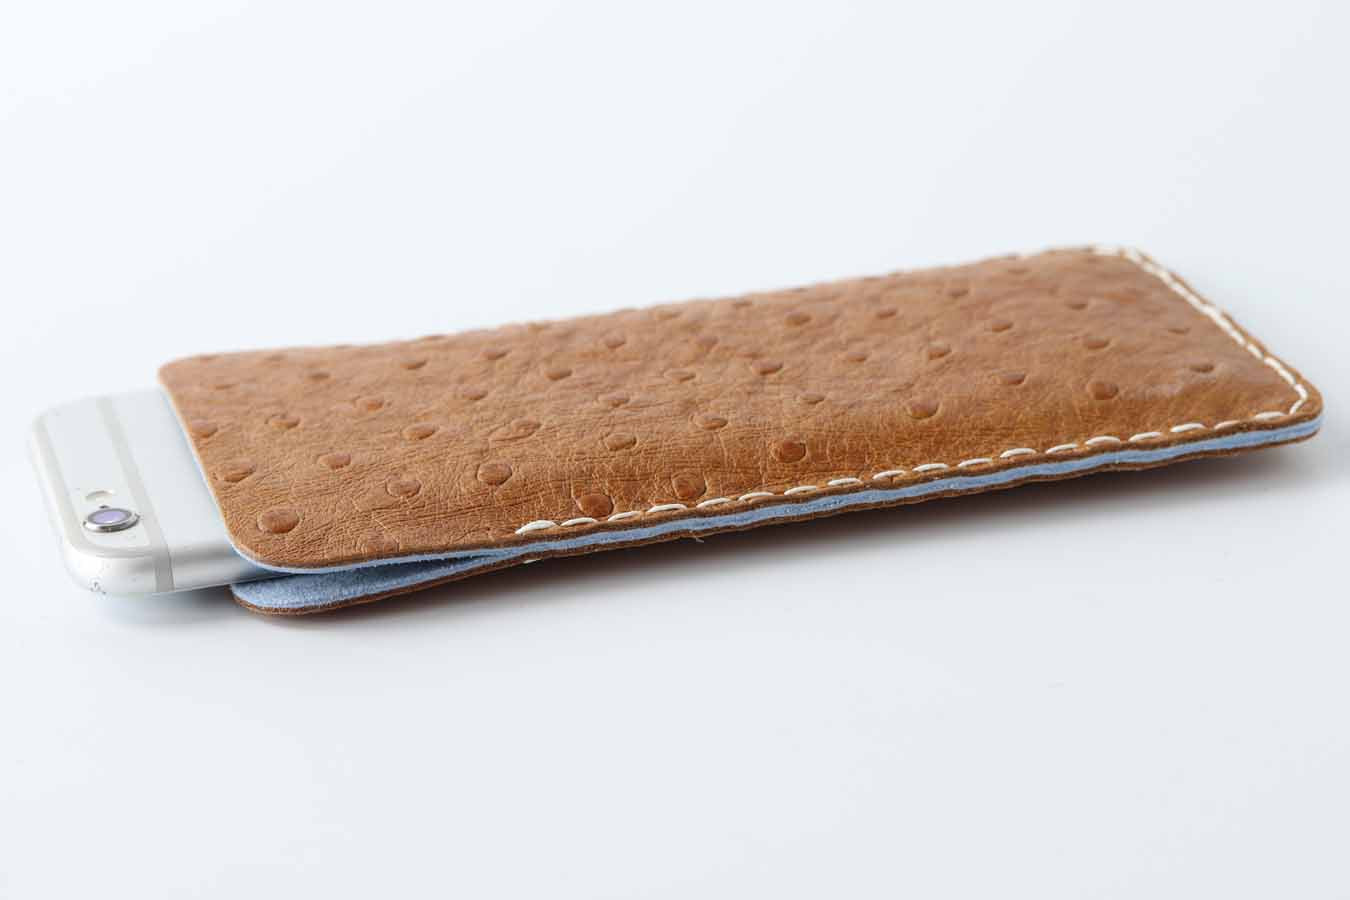 Premium Leather Sleeves, Pouches, and Cases for iPhone - Shop Now